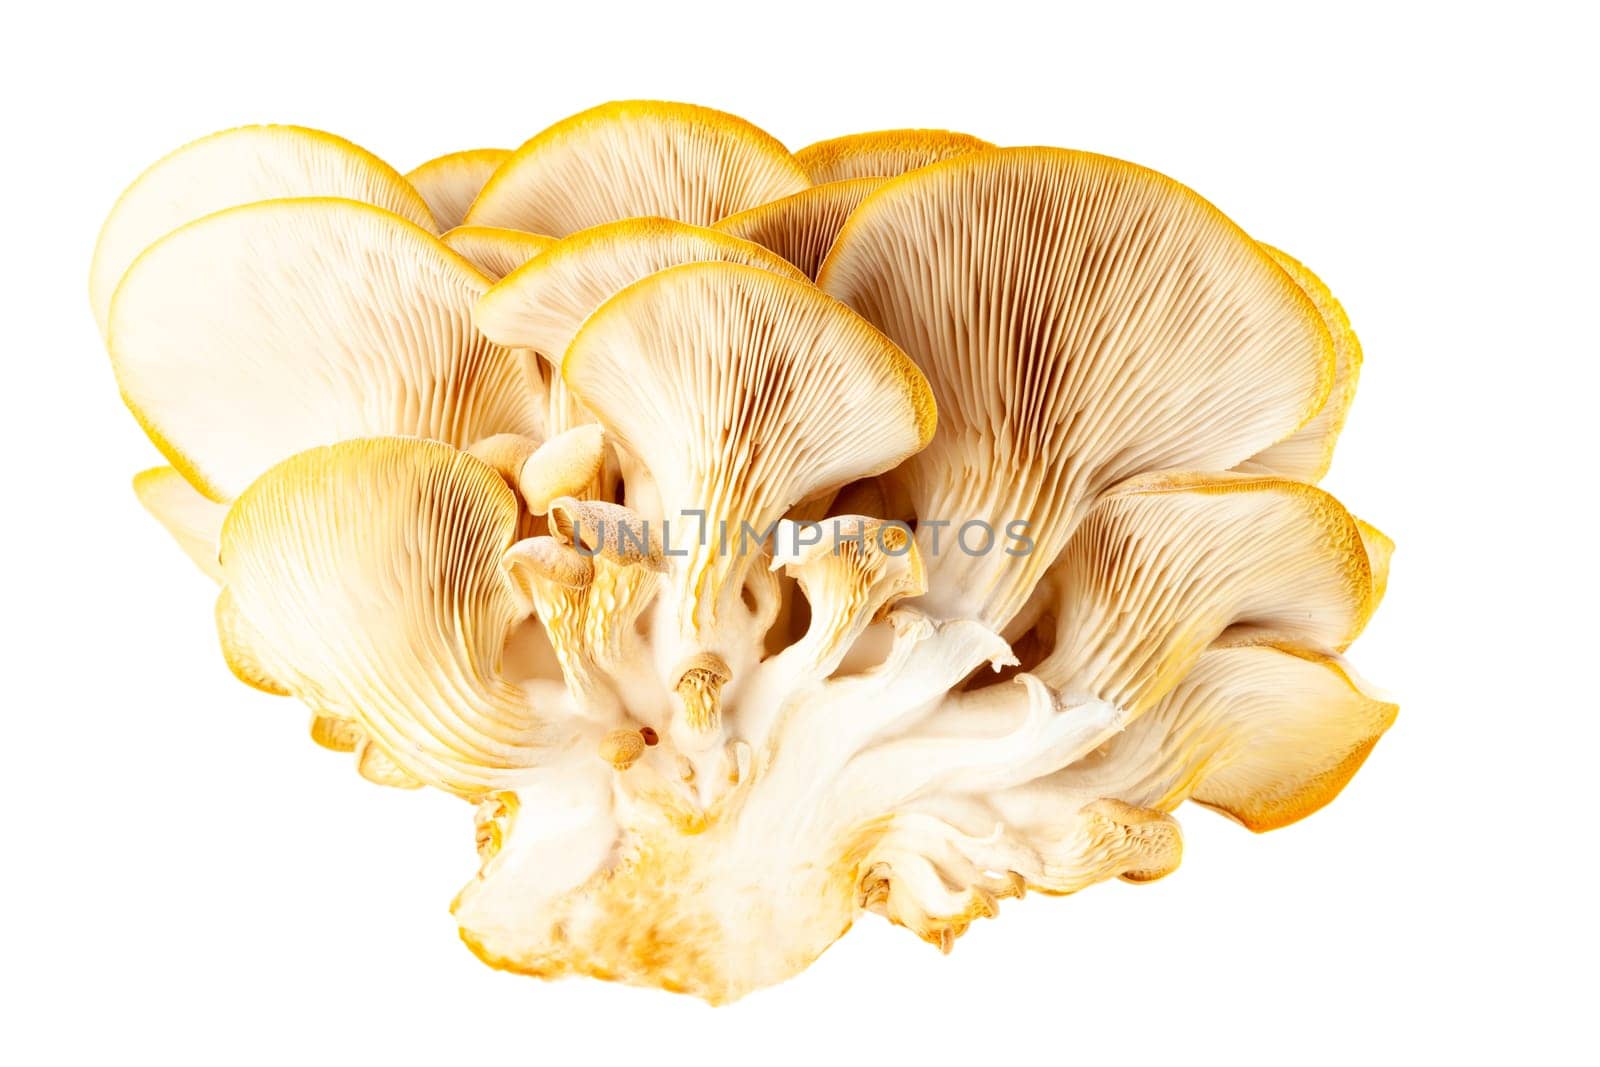 oyster mushroom close up isolated on white background by glavbooh